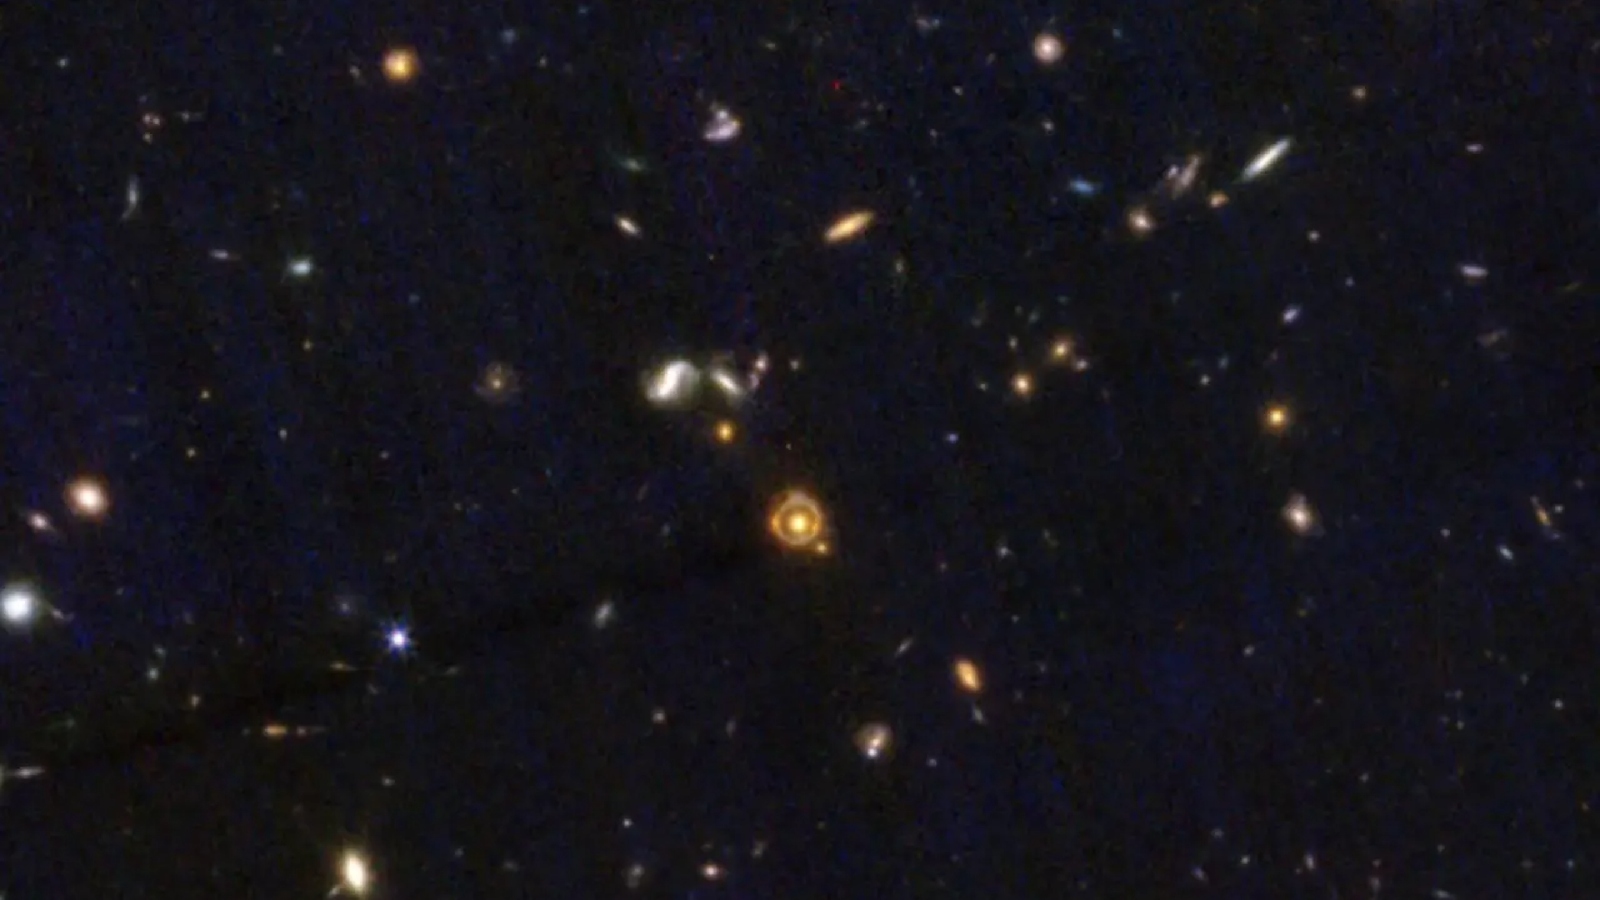 A deep field view of space with a tiny Einstein ring in the middle